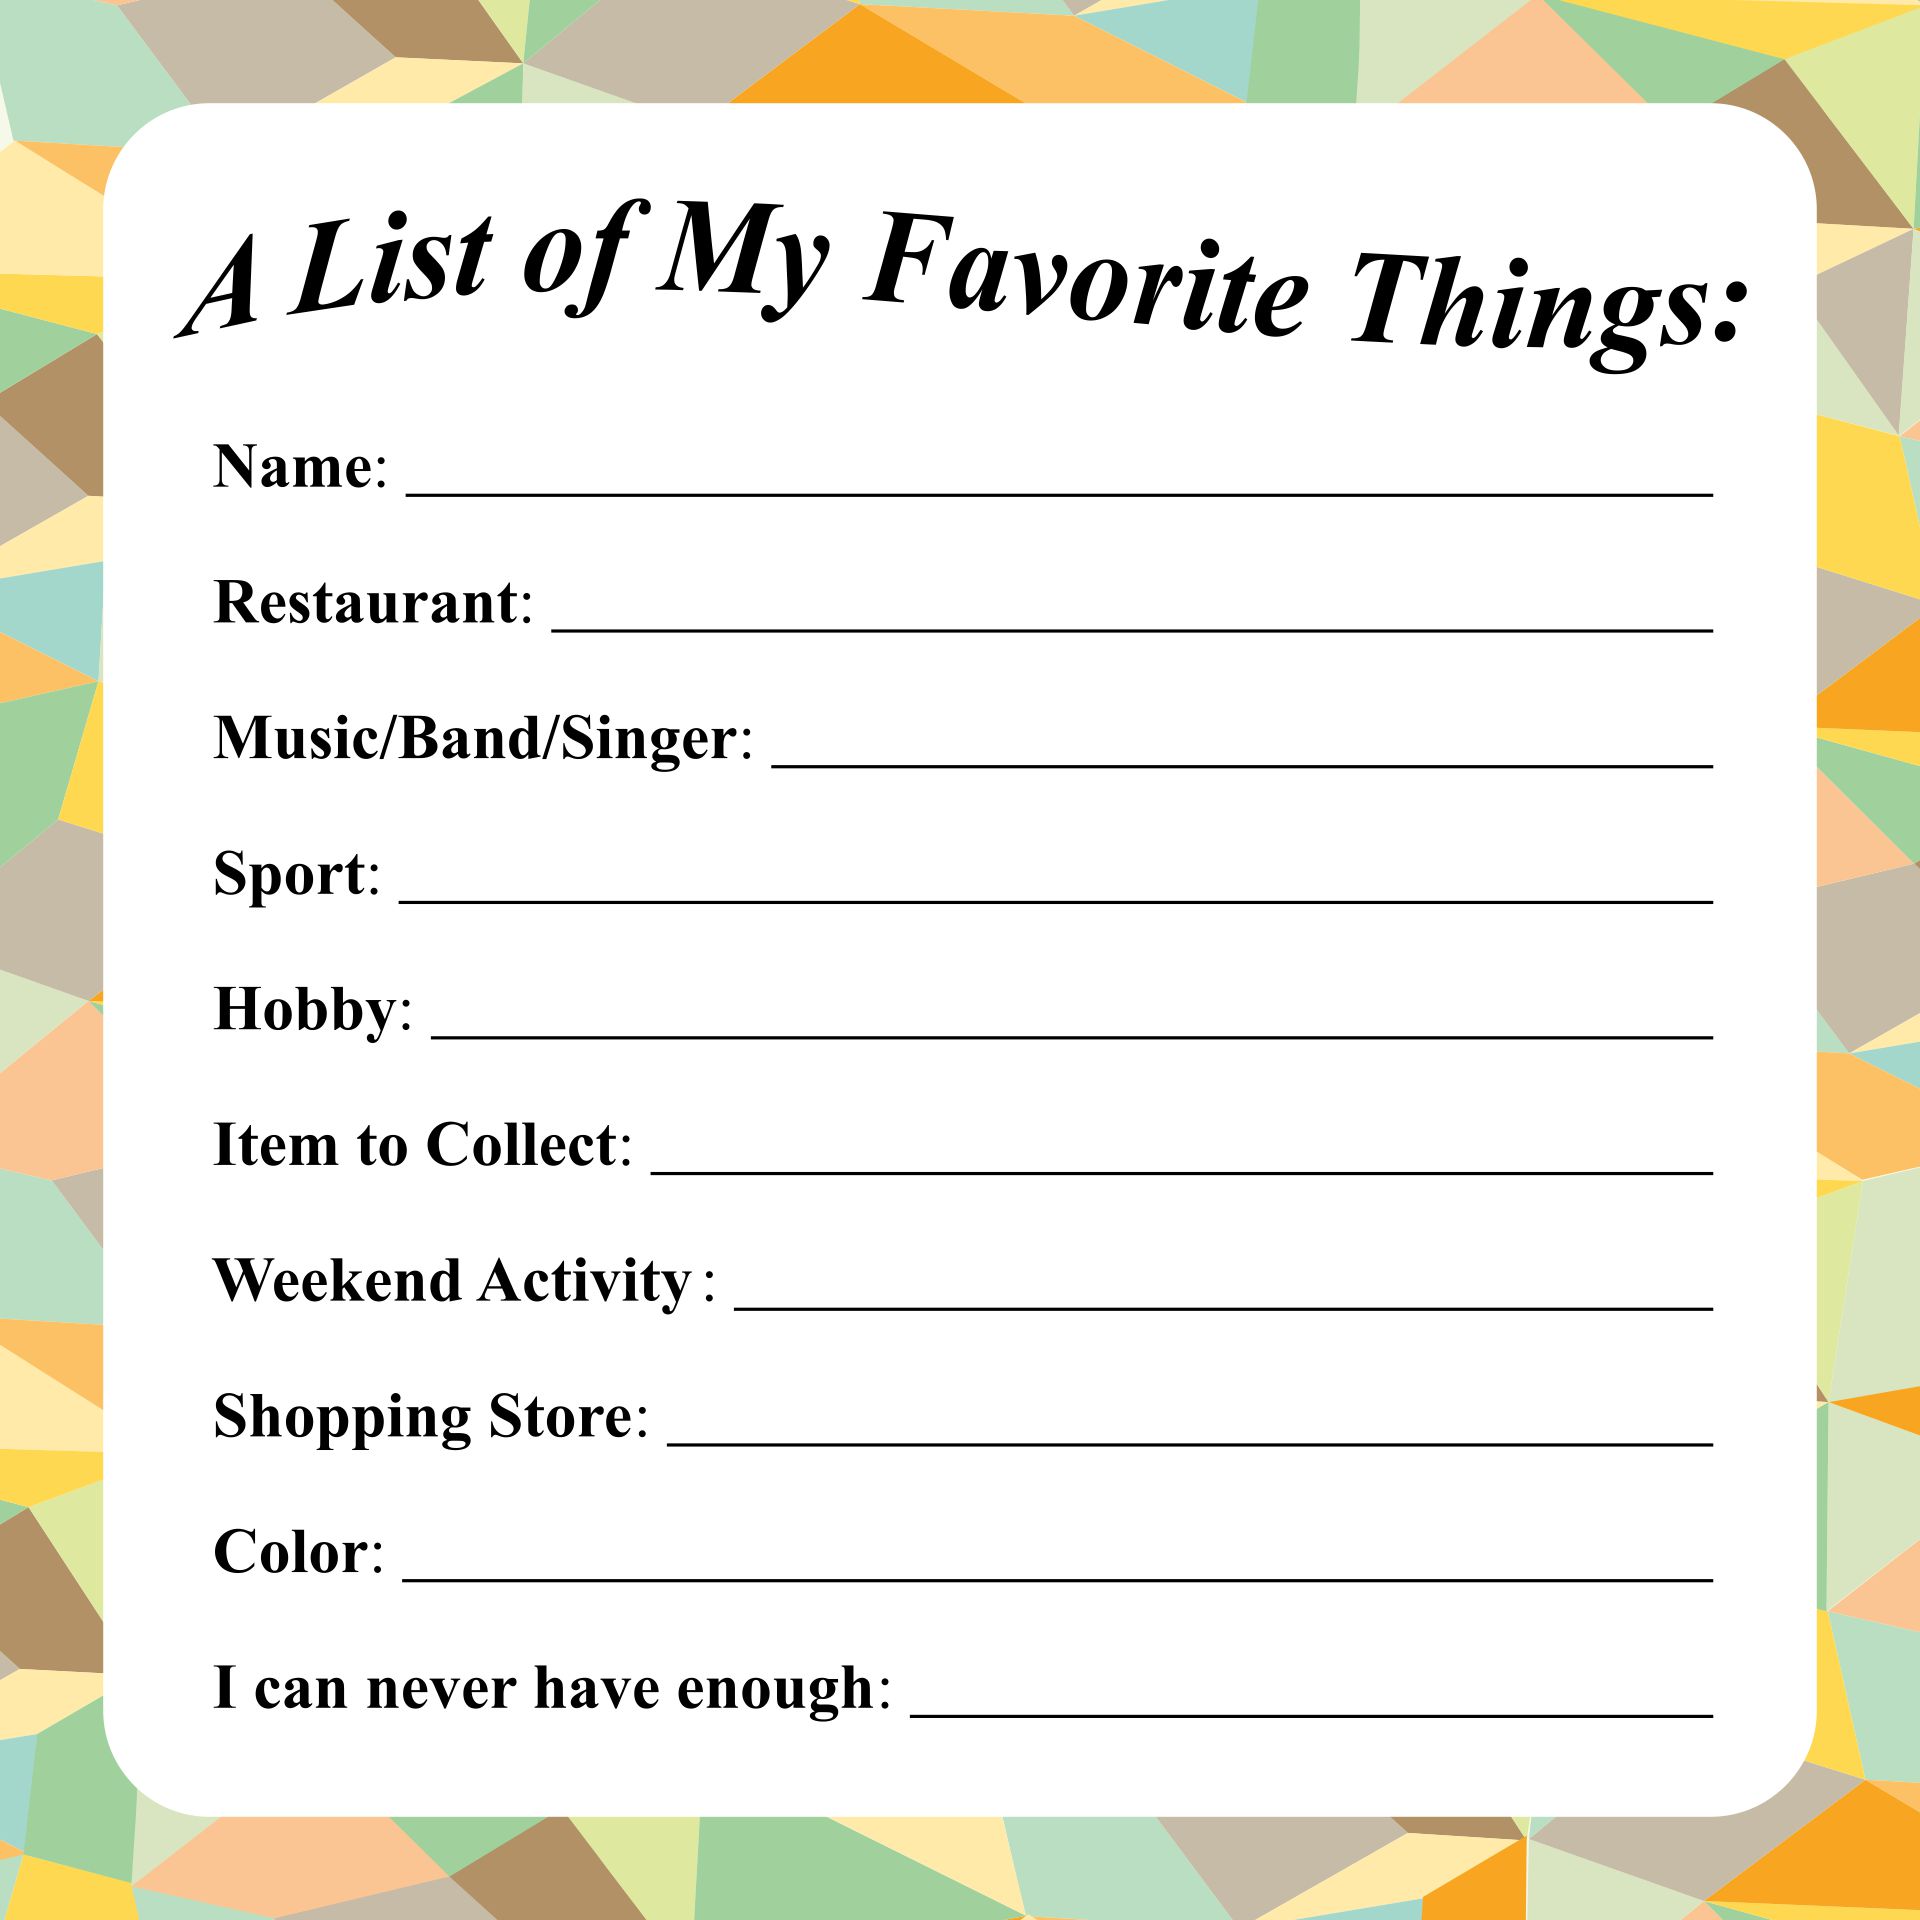 tell me what your least favorite thing to do is each day and why?*